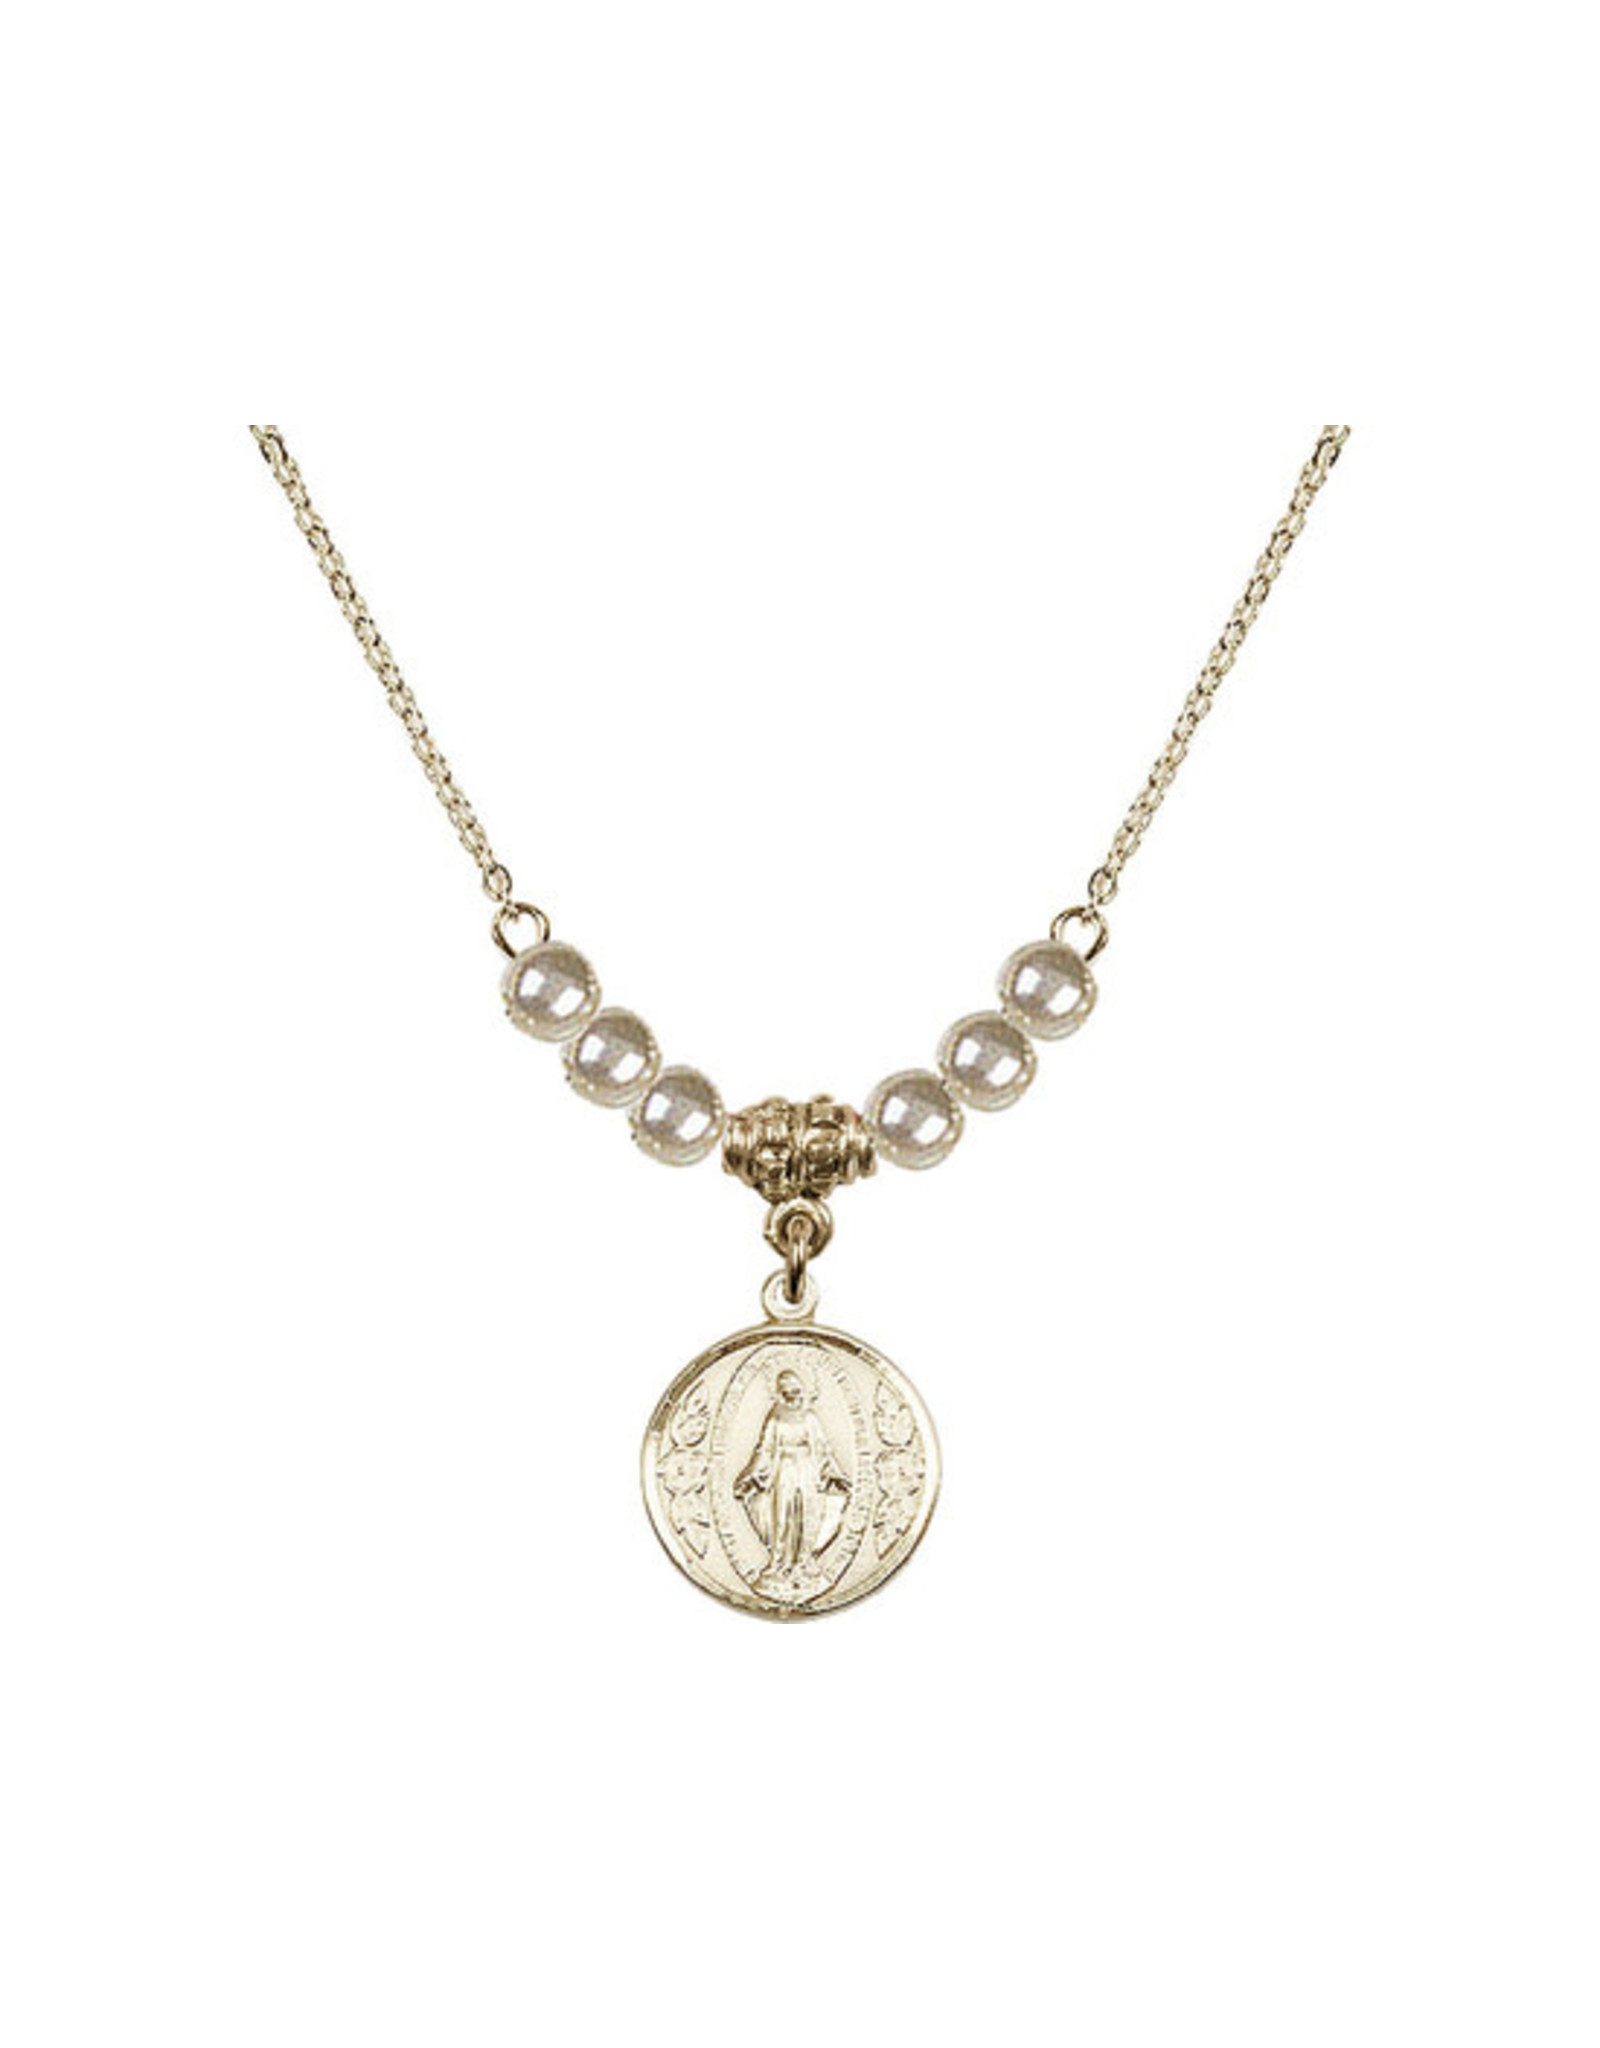 Bliss Miraculous Medal Necklace, Gold Filled with Faux Pearls